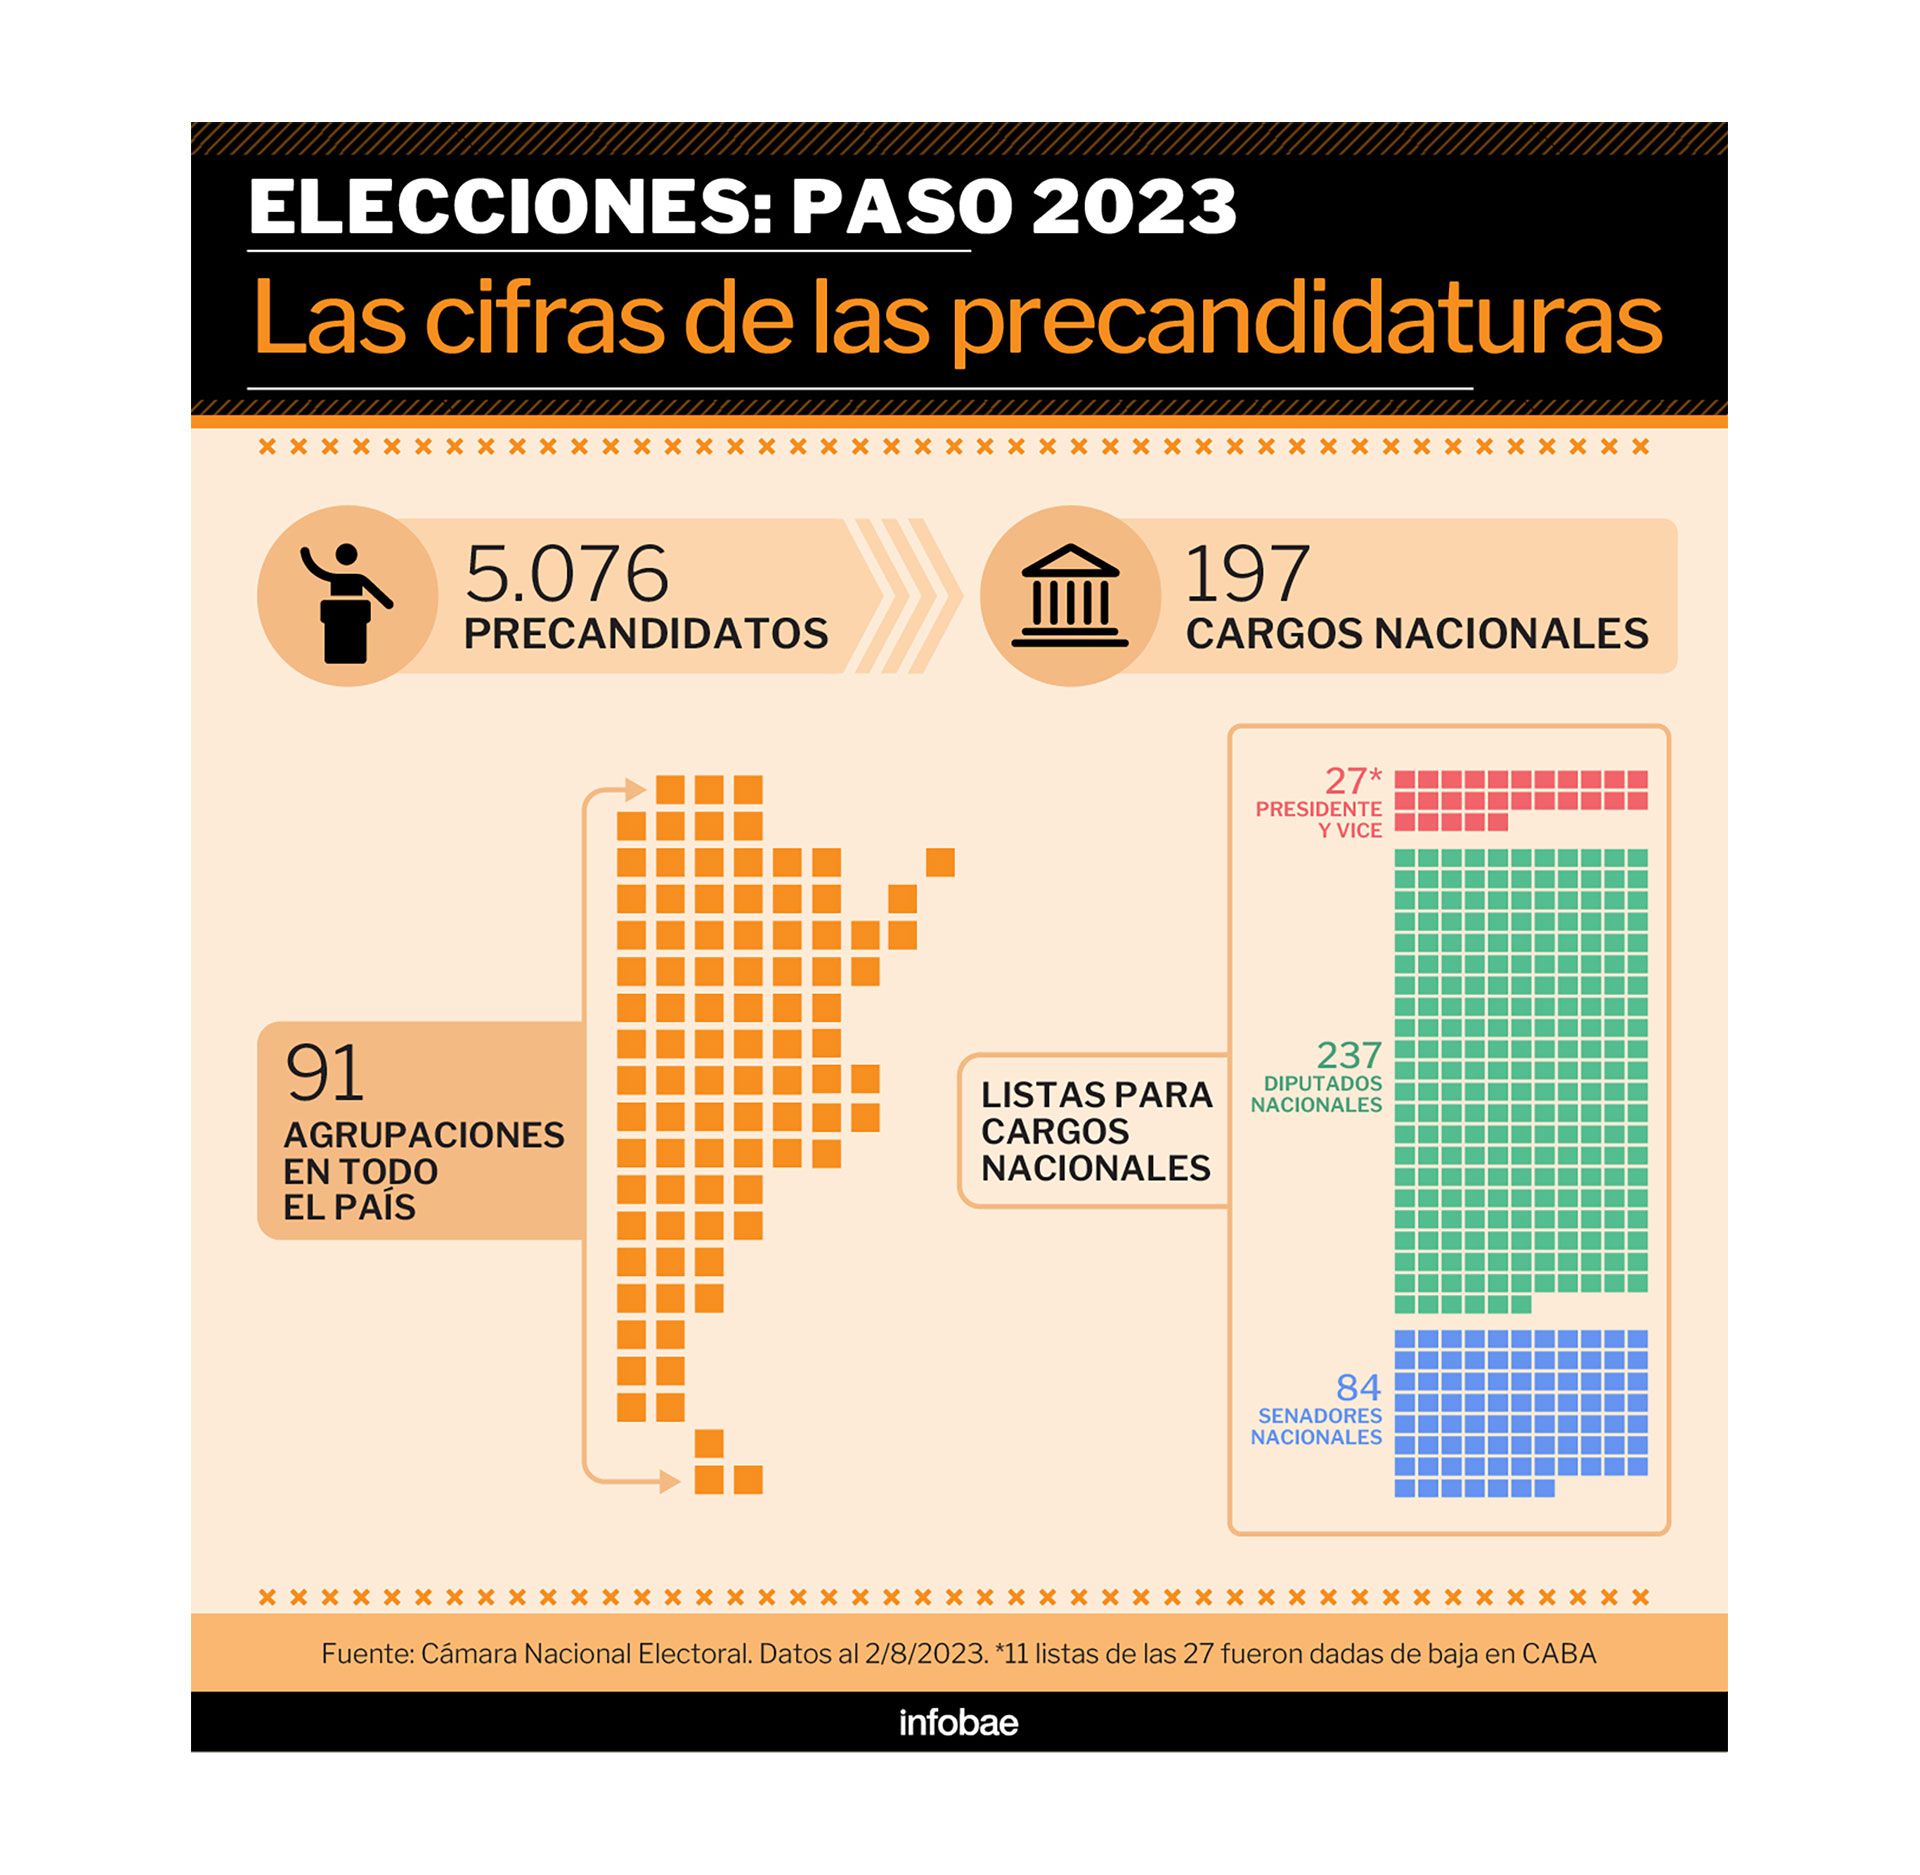 The pre-candidacies throughout the country of these PASO 2023, in numbers